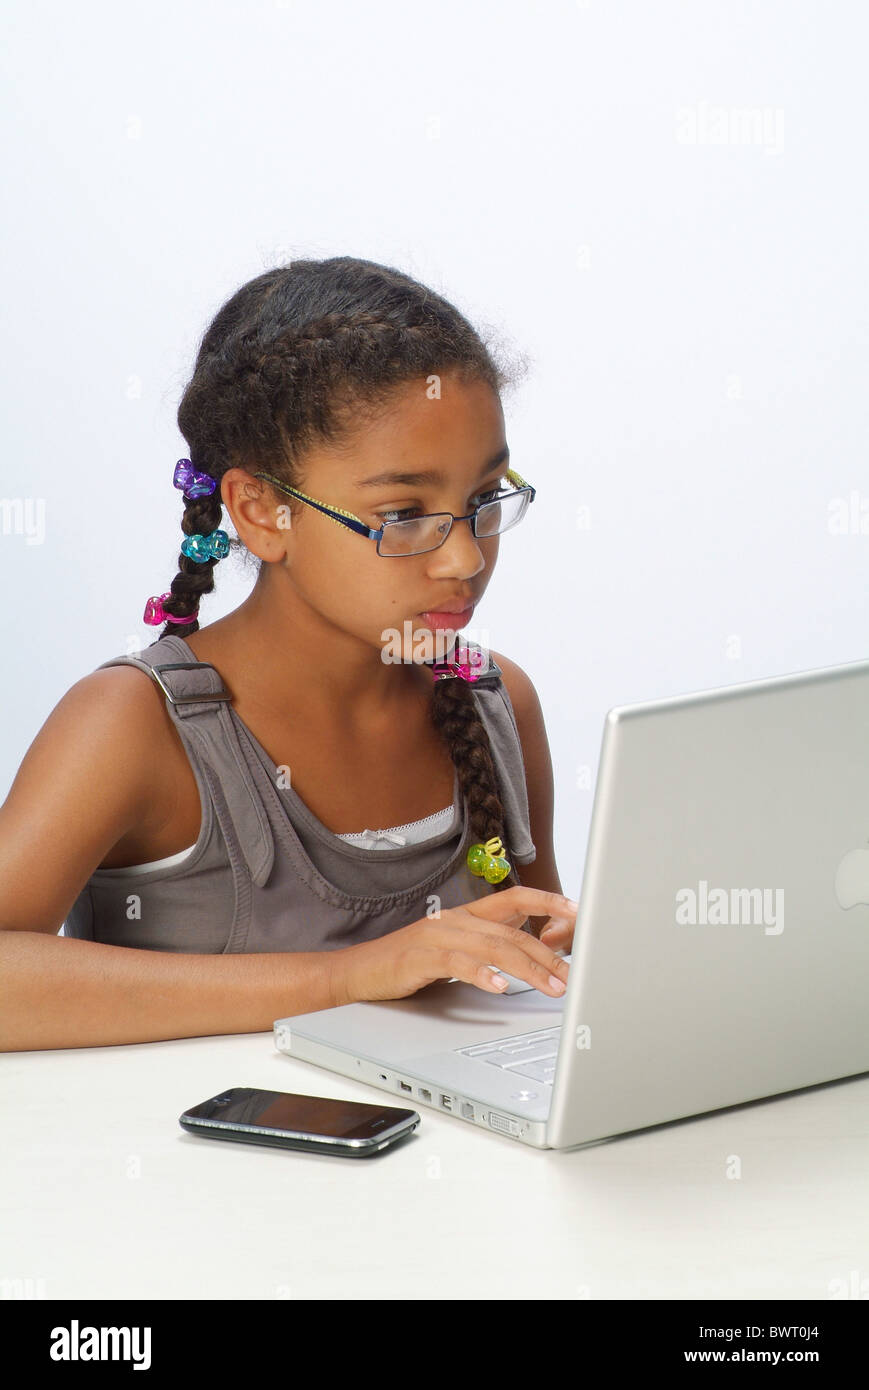 Portrait of a girl with a laptop and an iPhone Stock Photo